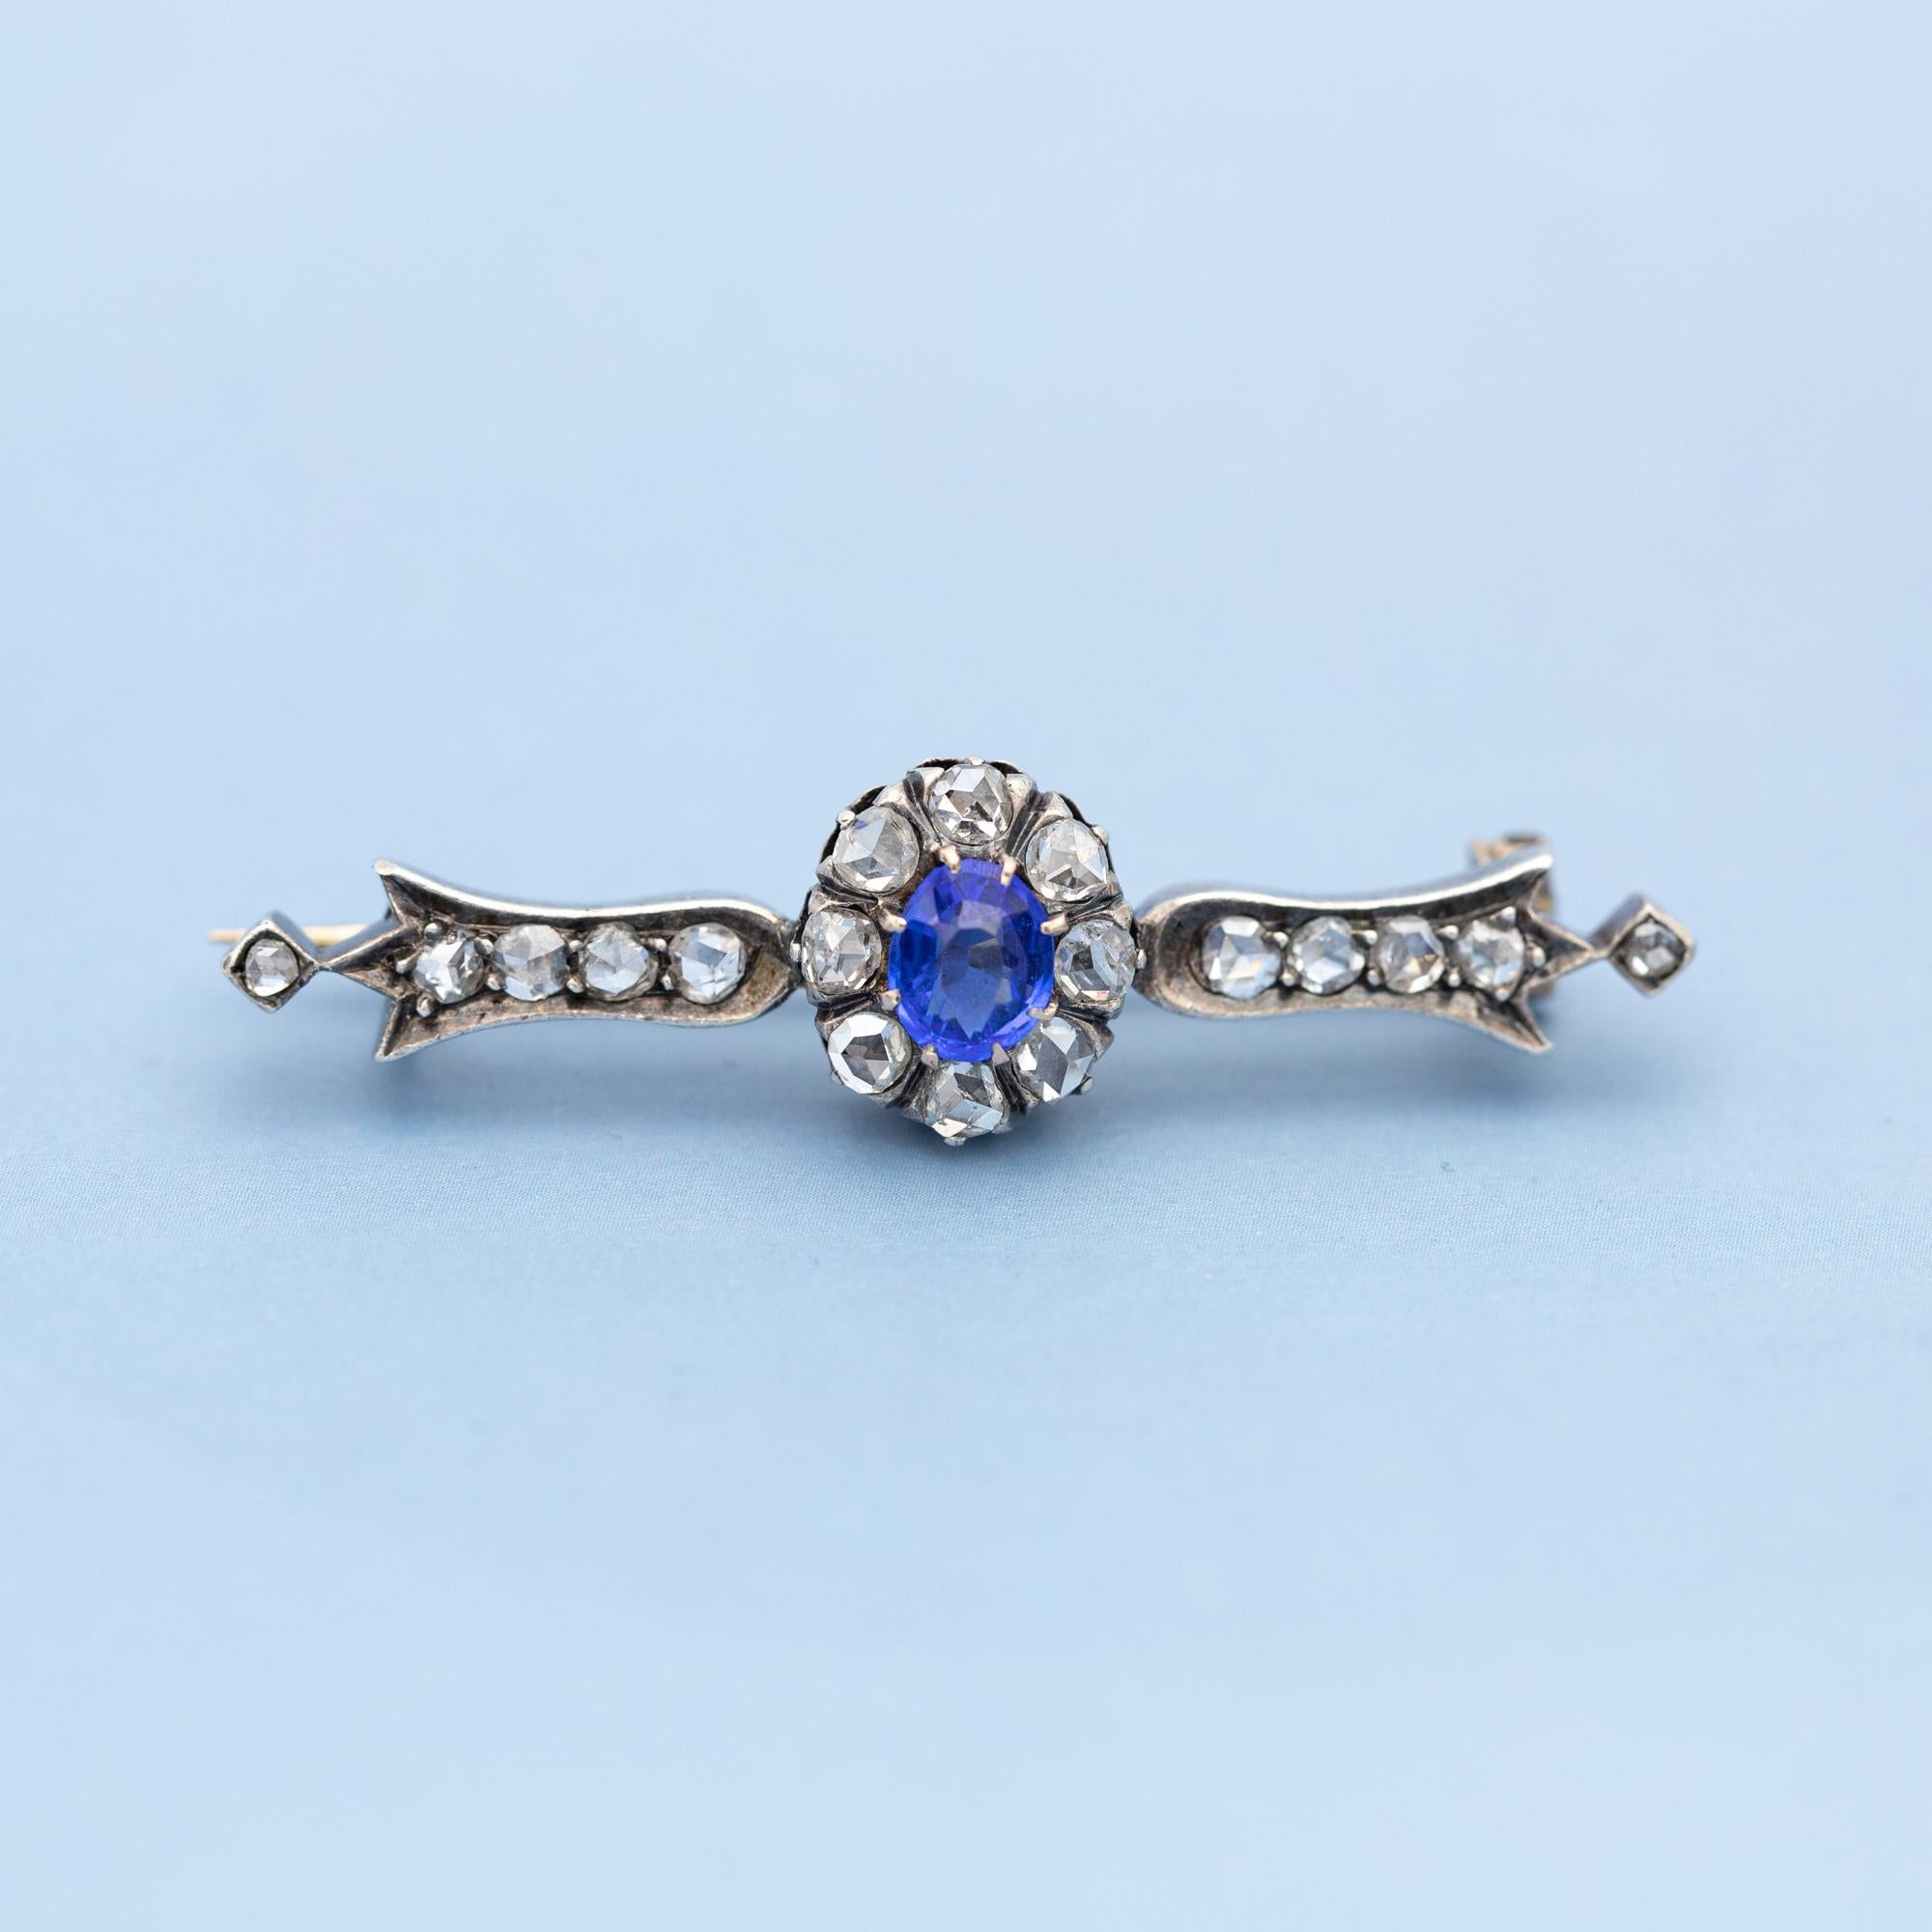 Wonderful French antique bar brooch - Victorian - rose cut diamonds & sapphire For Sale 4